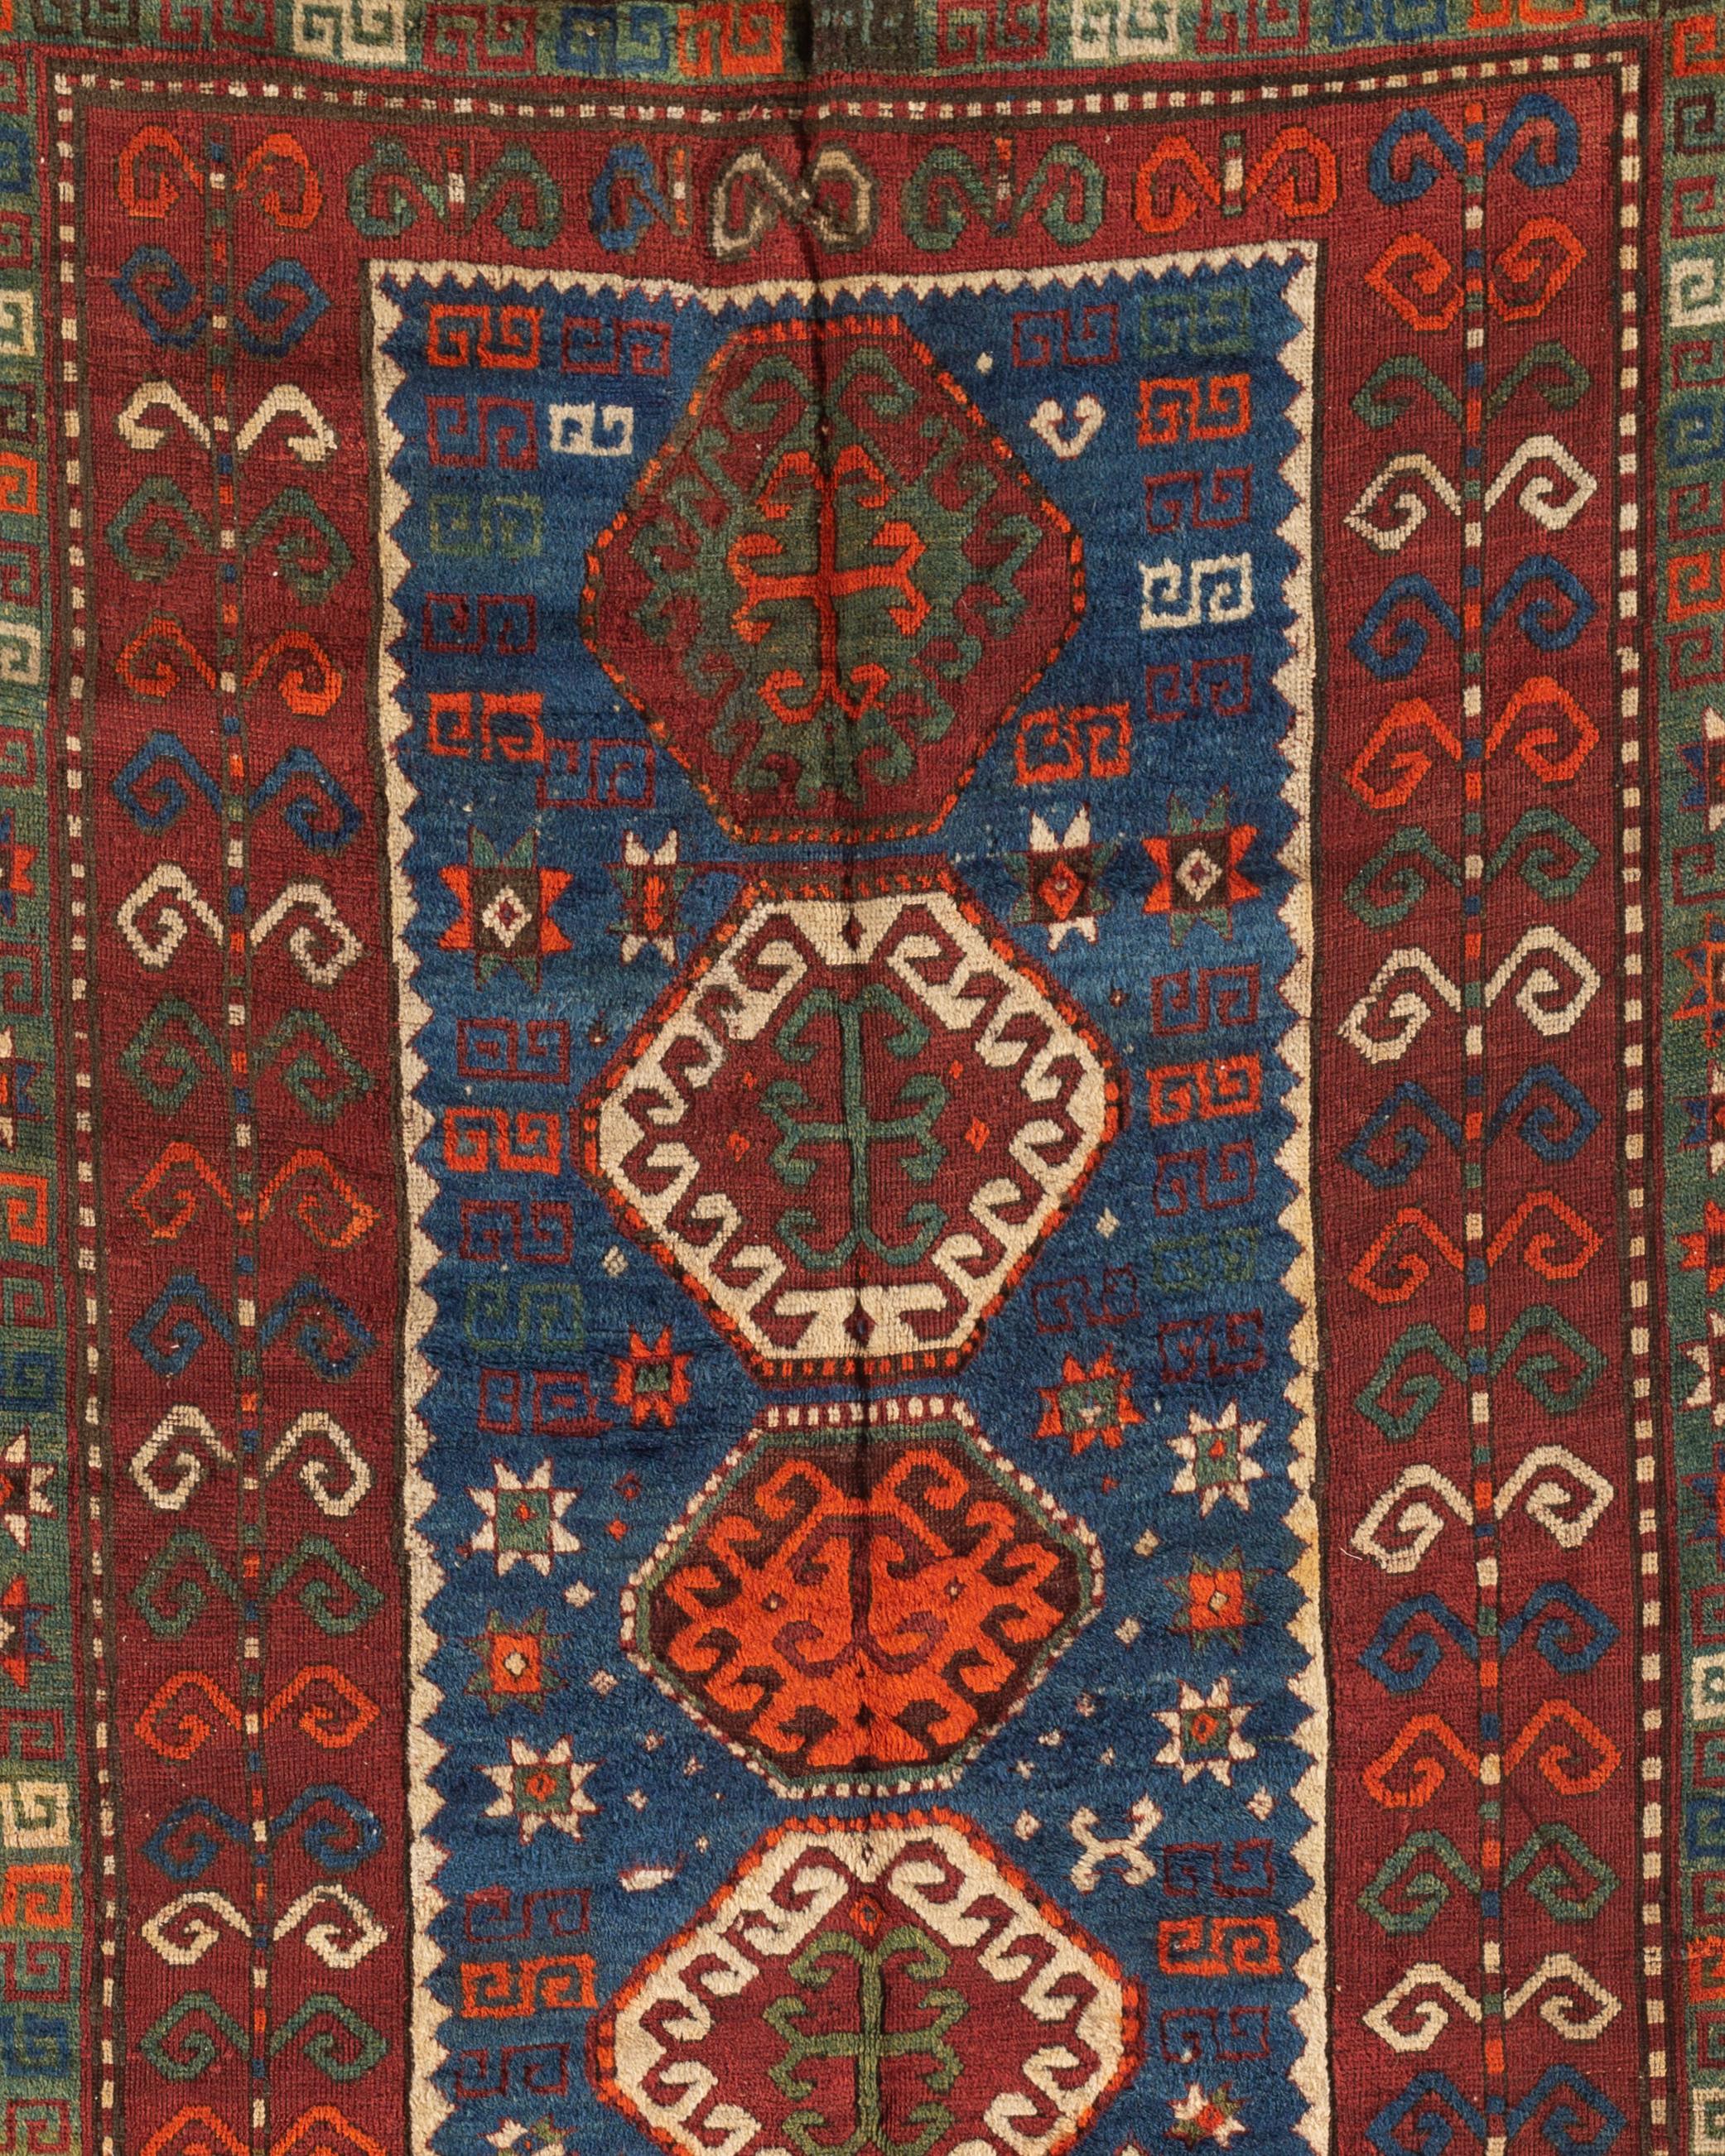 Antique Caucasian Kazak rug ,circa 1900. A south west Caucasian Kazak handwoven rug, circa 1900. With a central blue design enclosing five motifs within a red field all surrounded by multiple guard borders. The detail in the design and craftsmanship